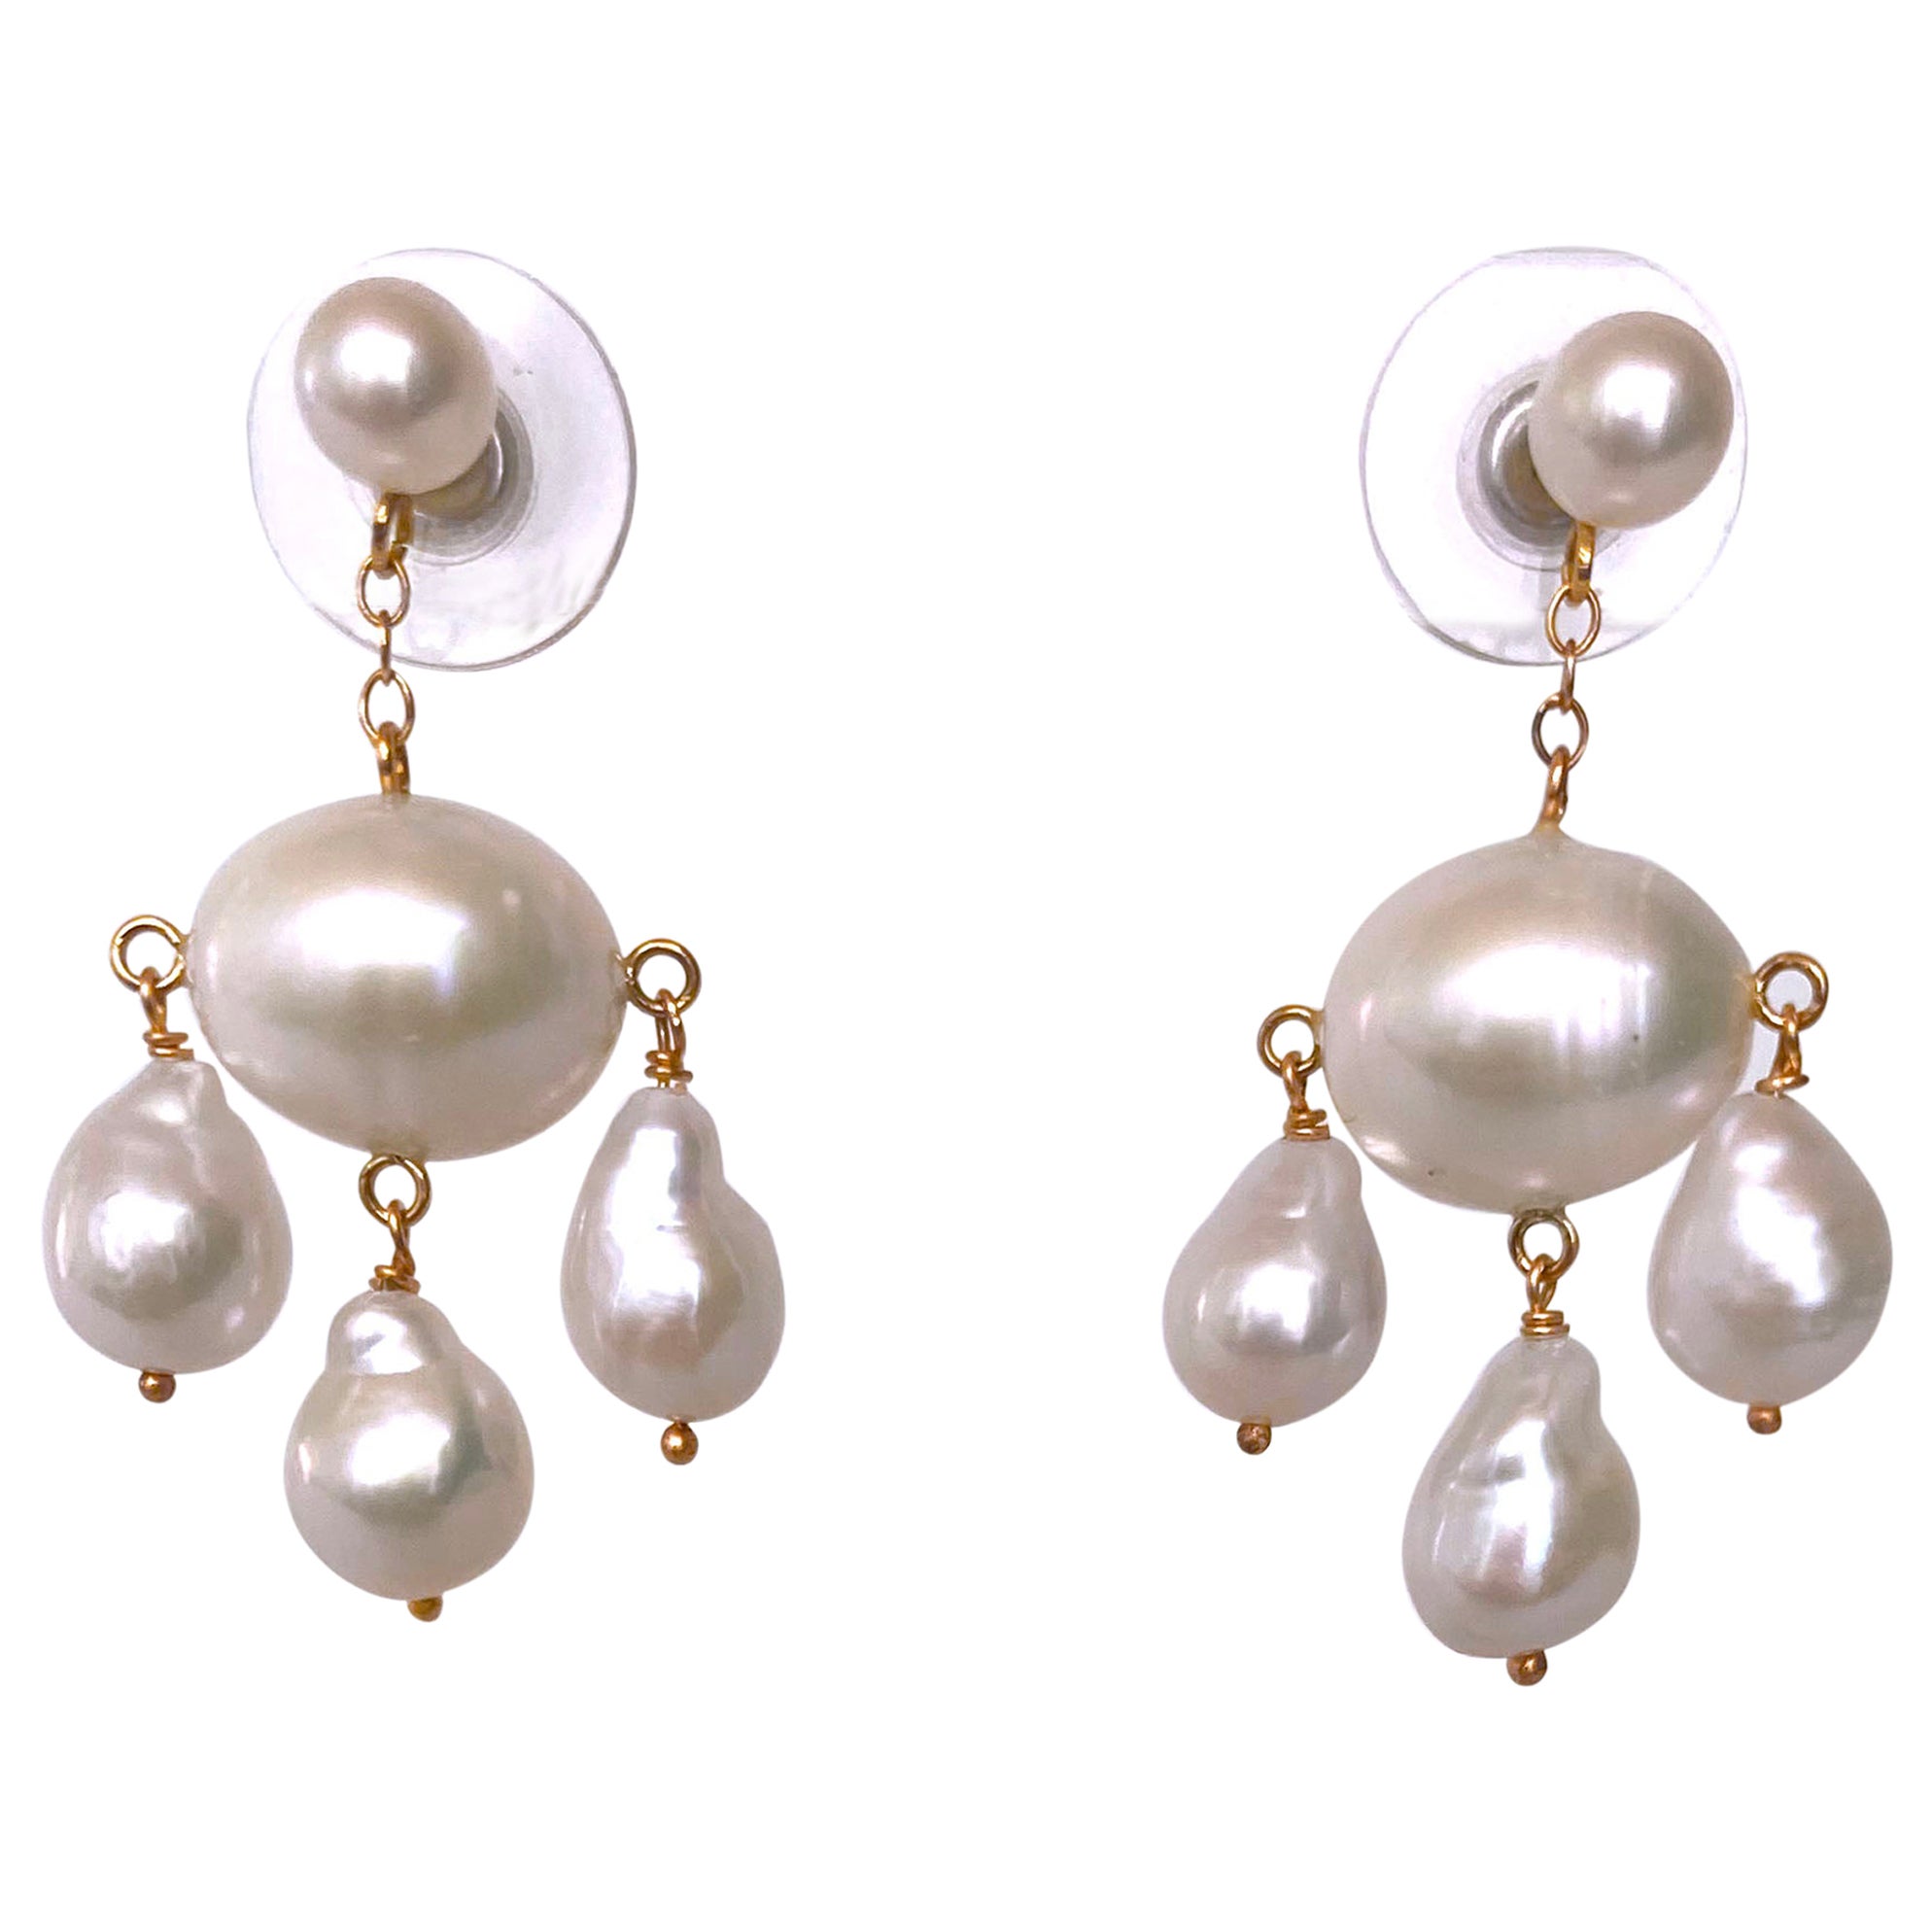 Details about   8-9MM white baroque pearl earrings 18K party woman gorgeous 